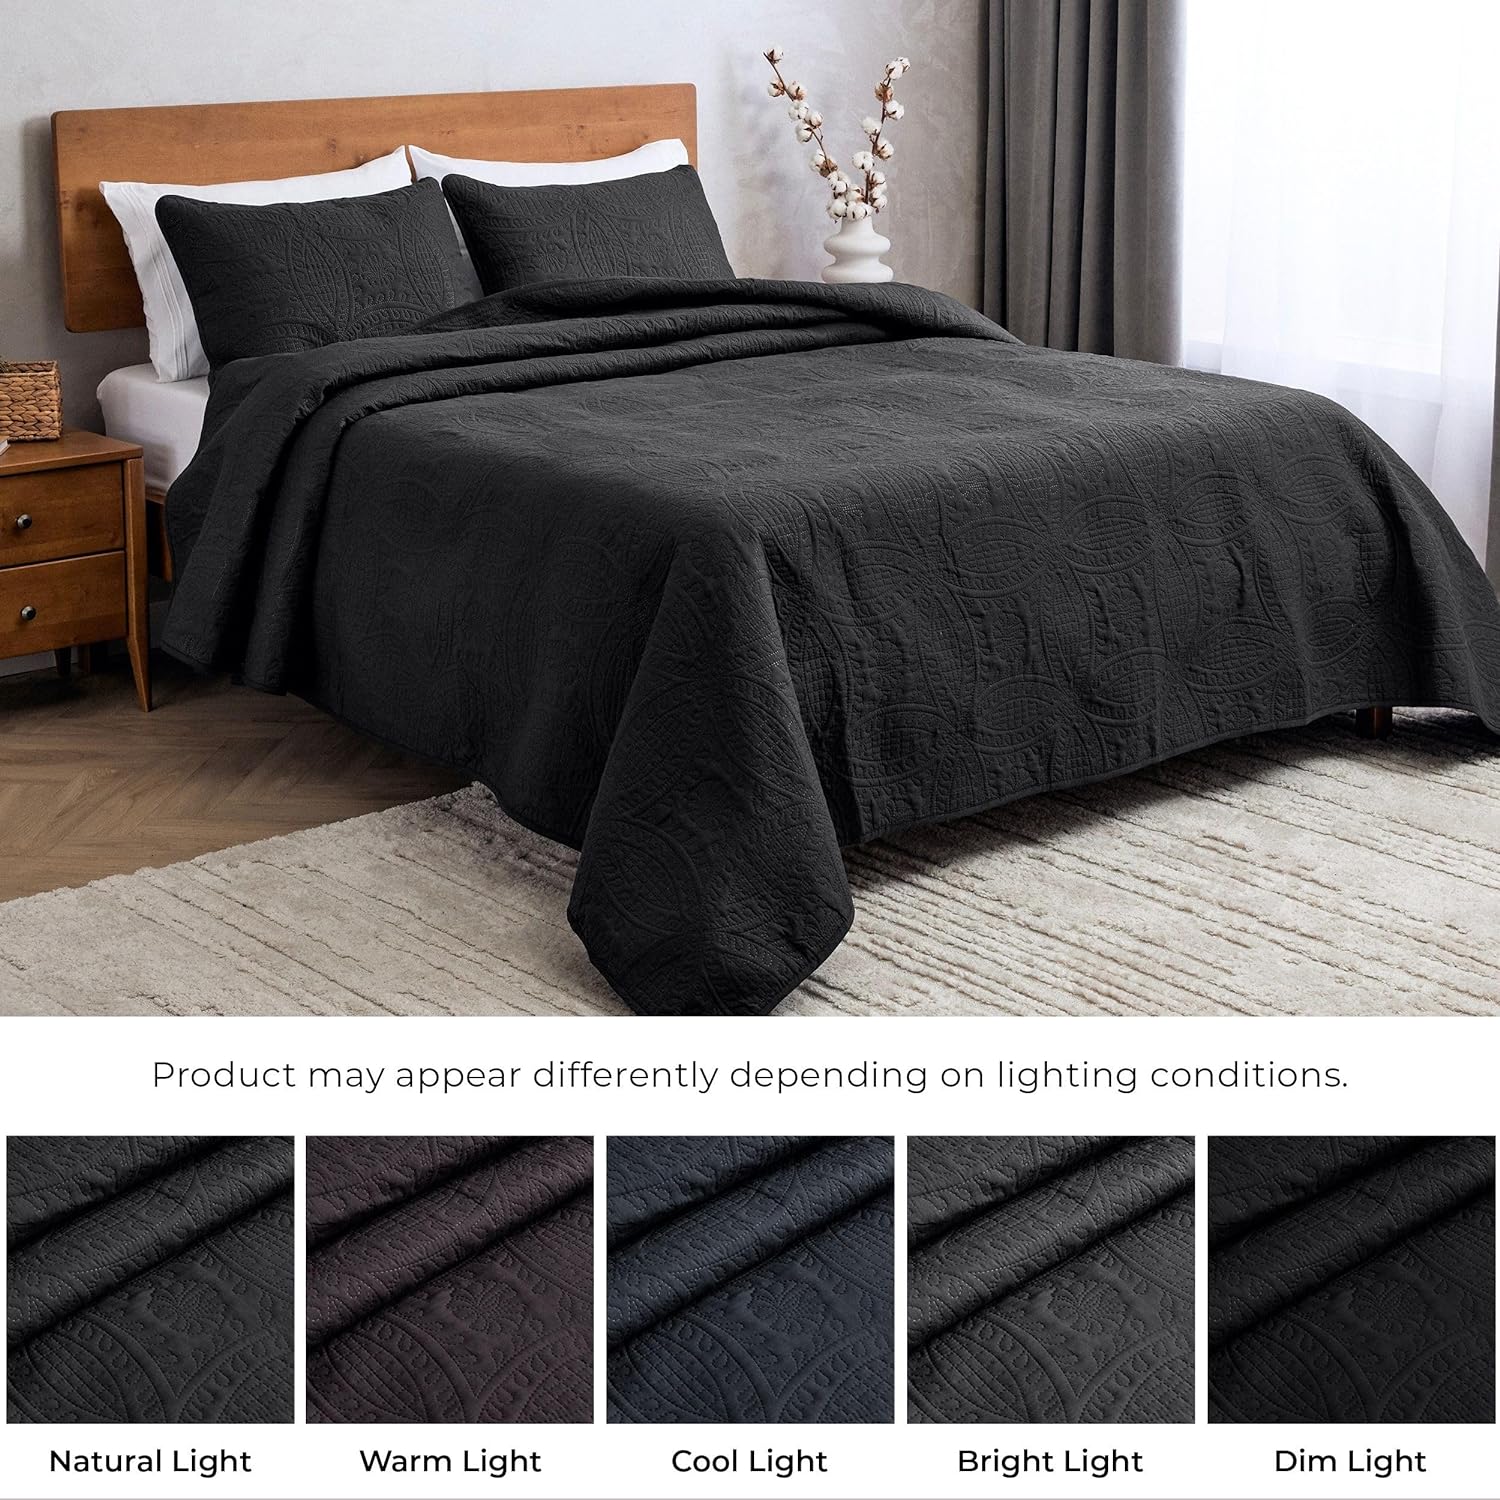 Mellanni Bedspread Coverlet Set - Full/Queen Bedding Cover with Shams - Ultrasonic Quilting Technology - 3 Piece Oversized Black Quilt Set - Bedspreads & Coverlets (Full/Queen, Black) 